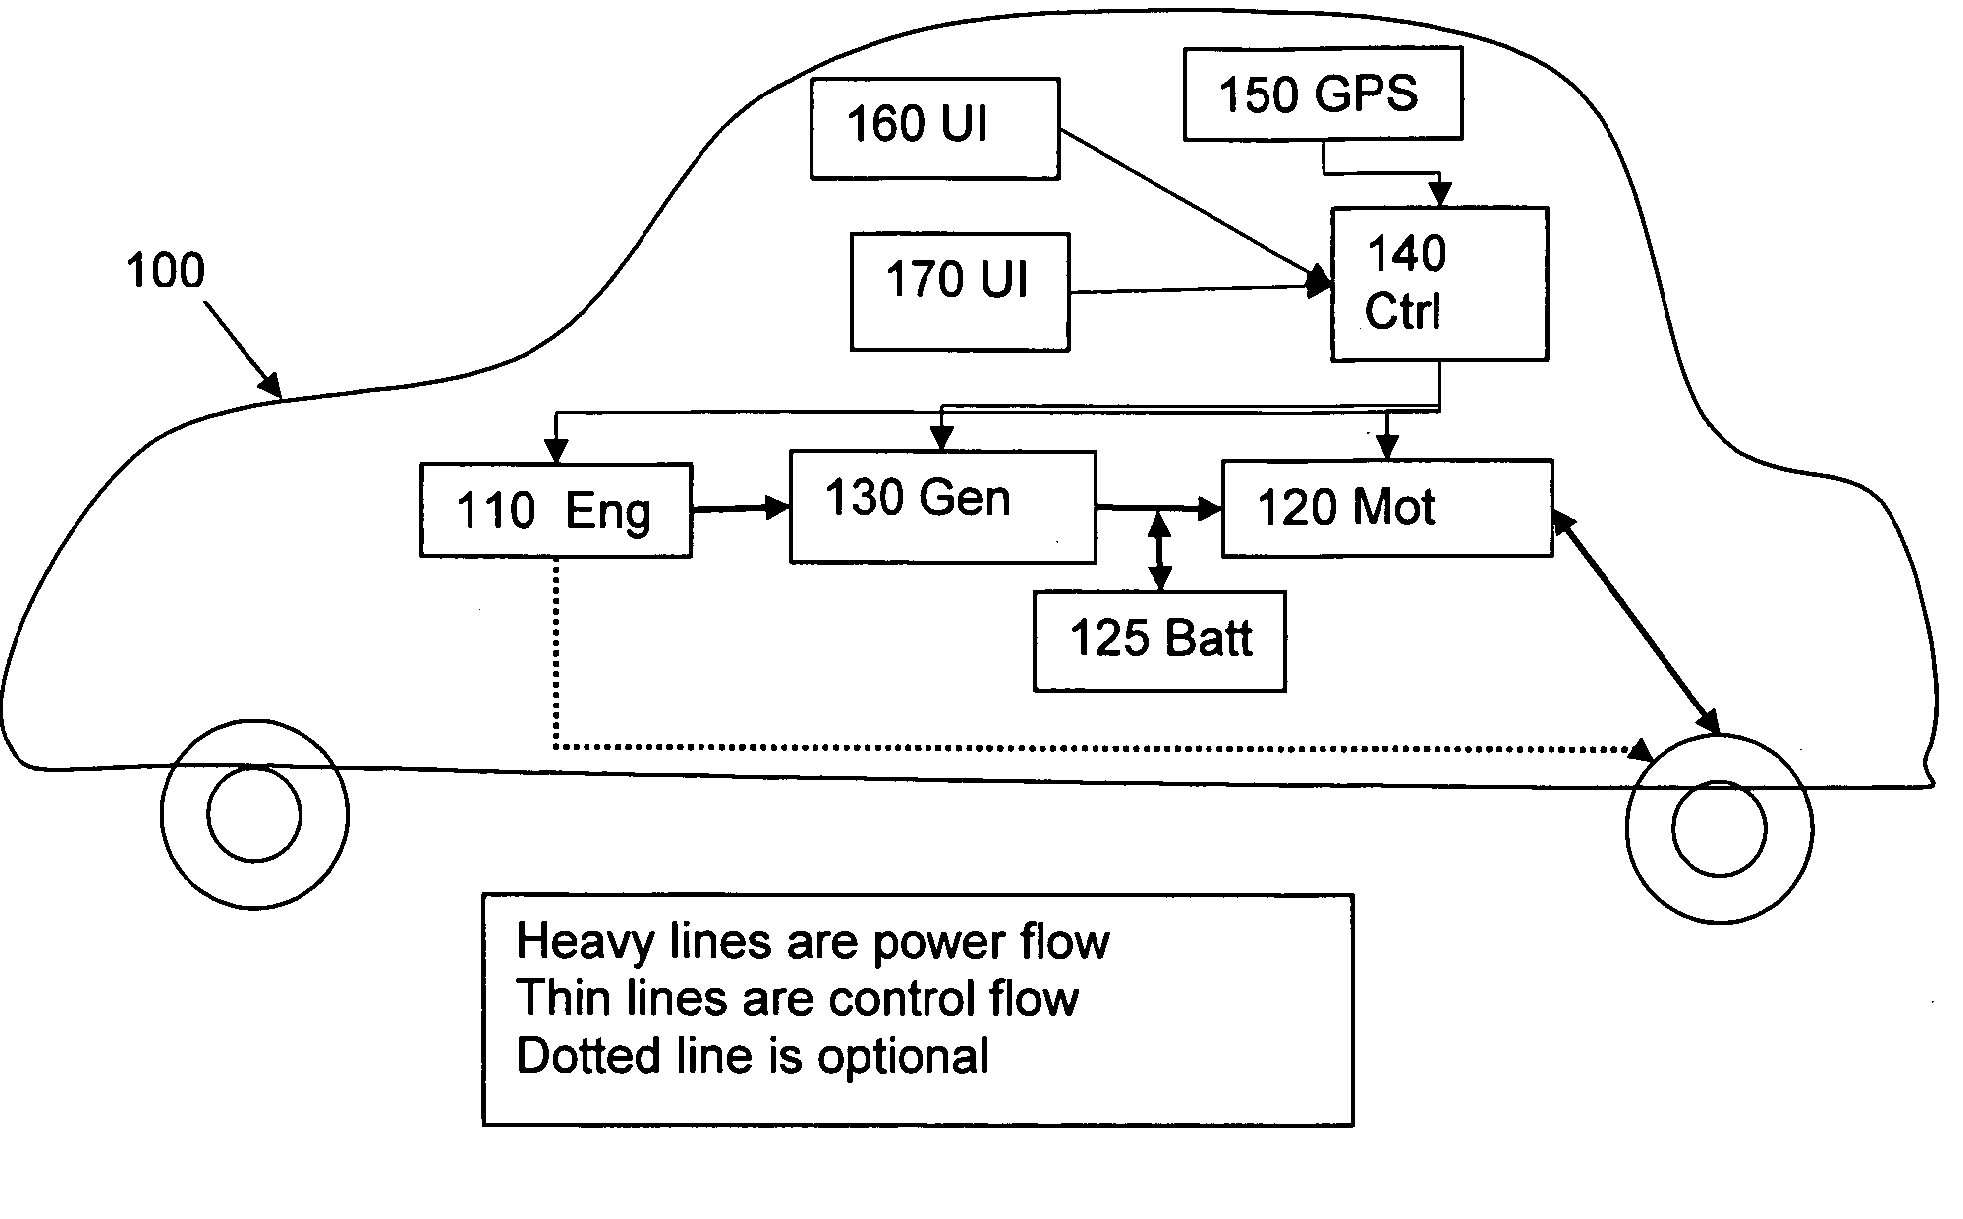 Technique for Optimizing the Use of the Motor in Hybrid Vehicles